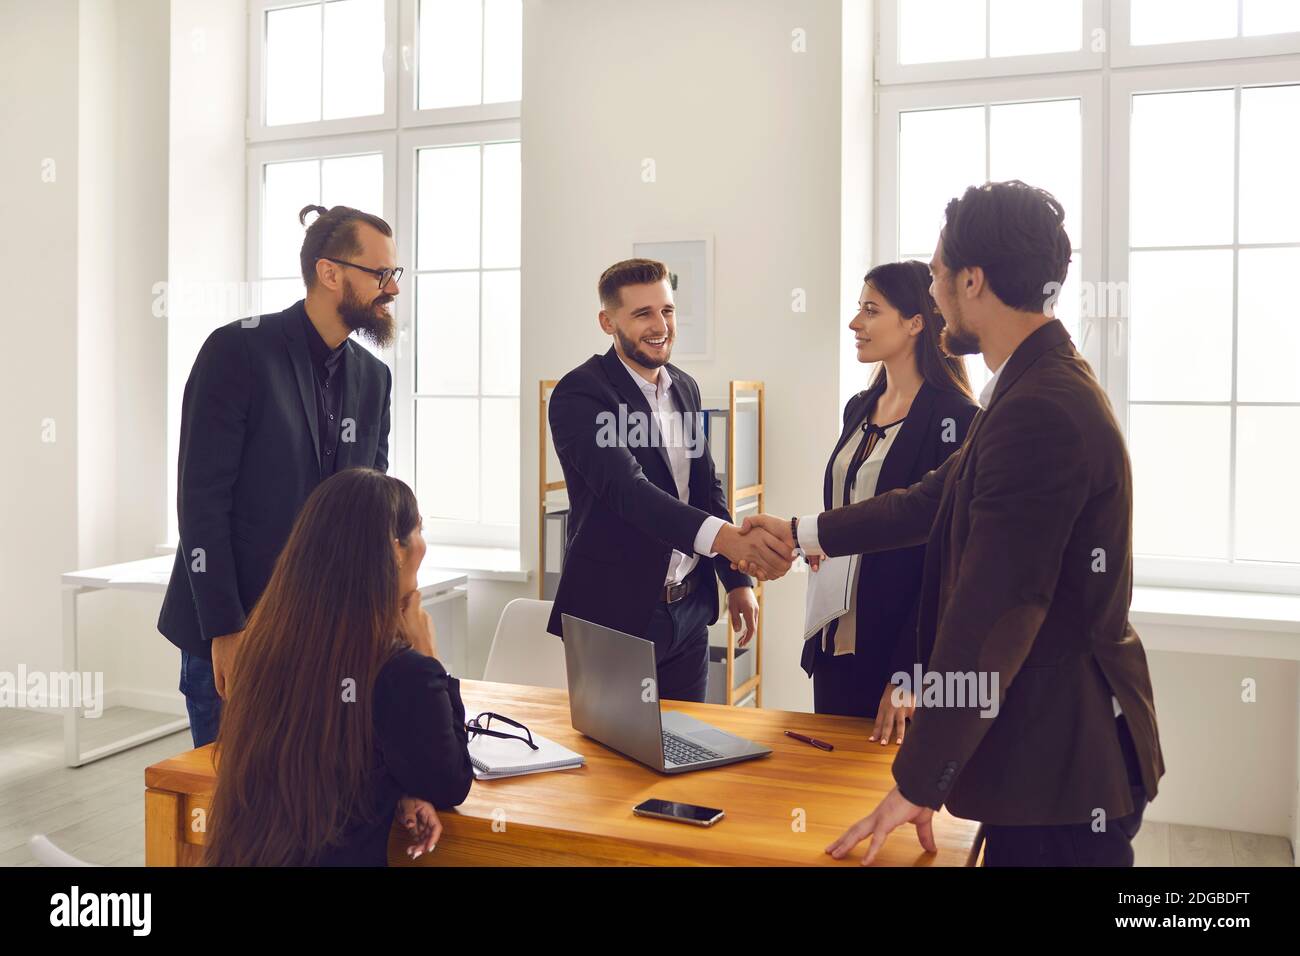 Young business people closing deal and shaking hands after successful negotiation in company office Stock Photo